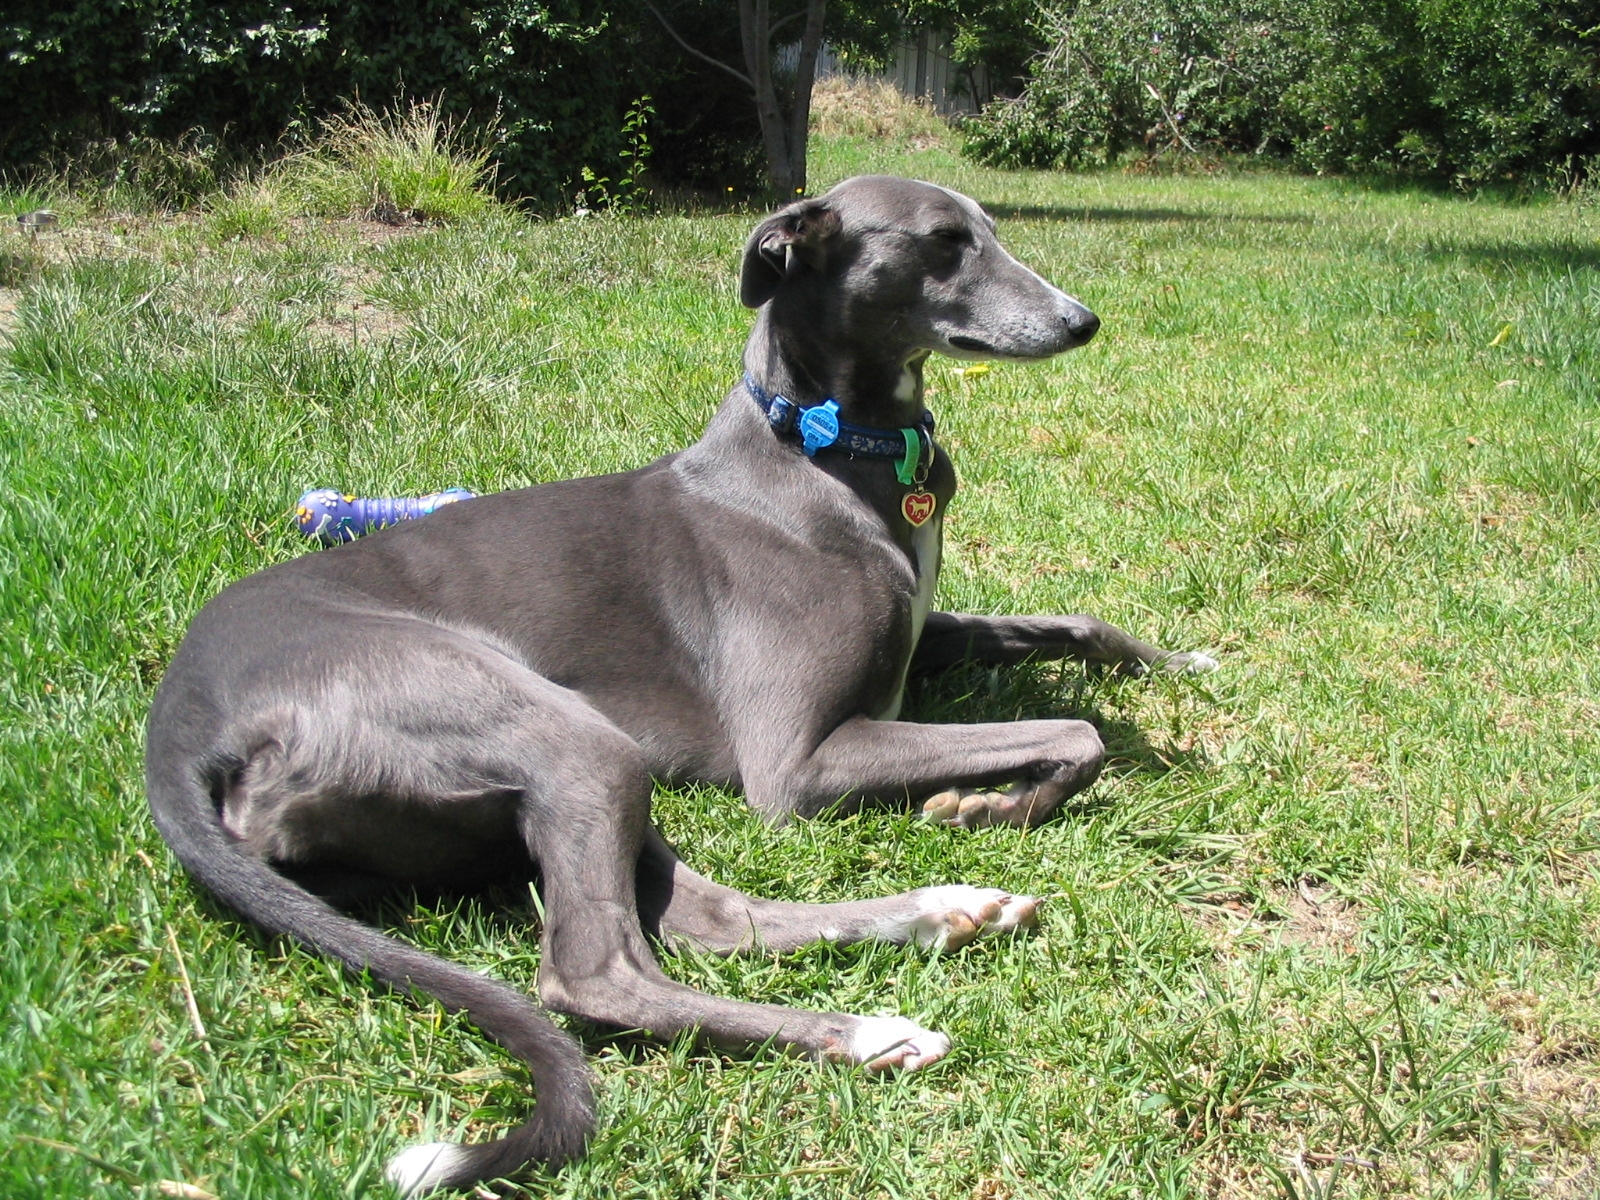 Greyhound Breed Guide - Learn about the Greyhound.